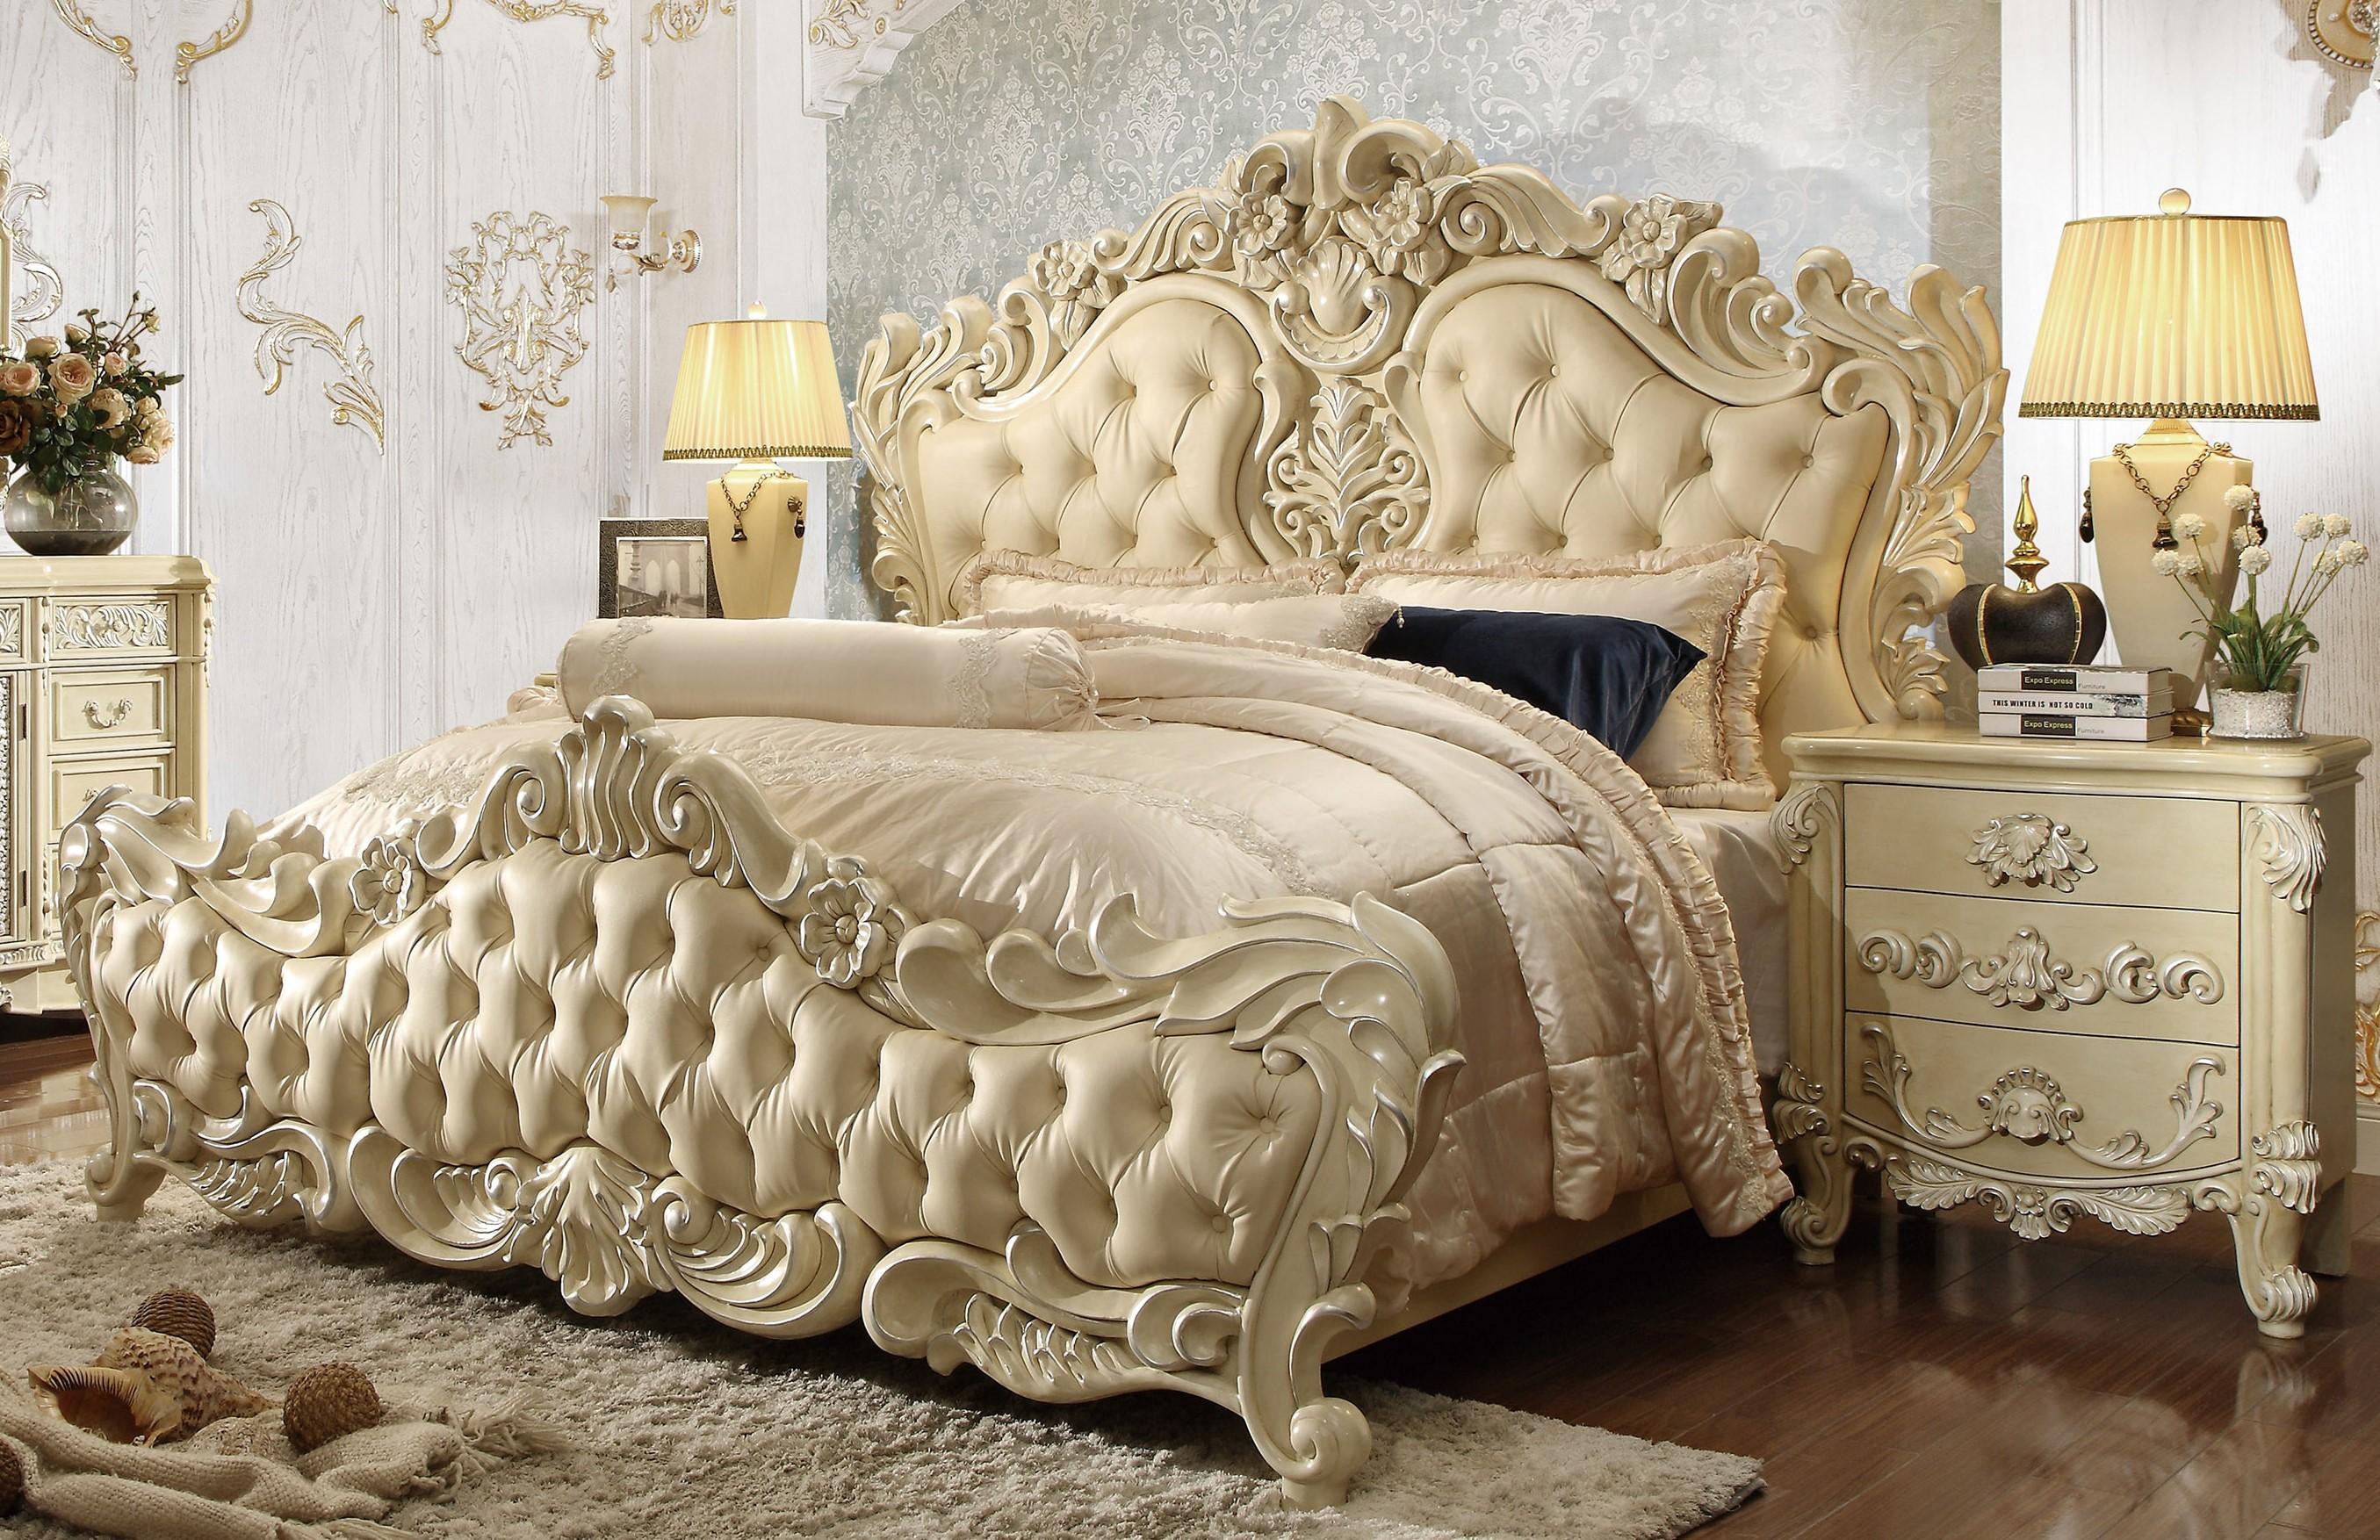 

    
Luxury Cream King Bedroom 3Pcs Carved Wood Traditional Homey Design HD-5800
